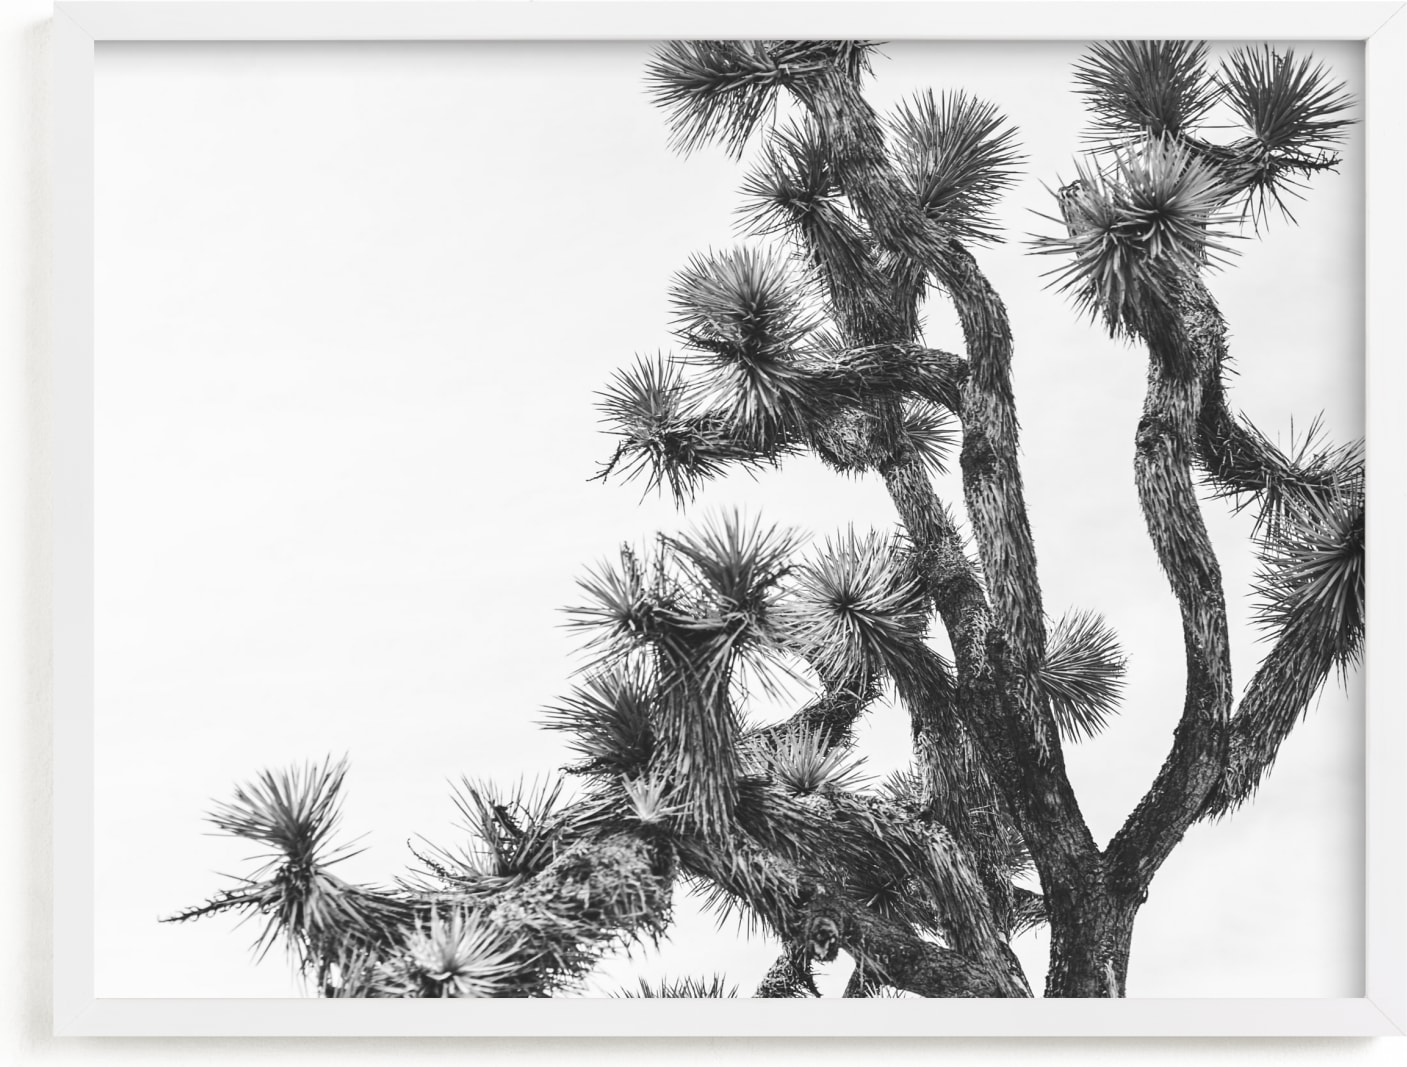 This is a black and white art by Katie Doherty called Joshua Tree in September.